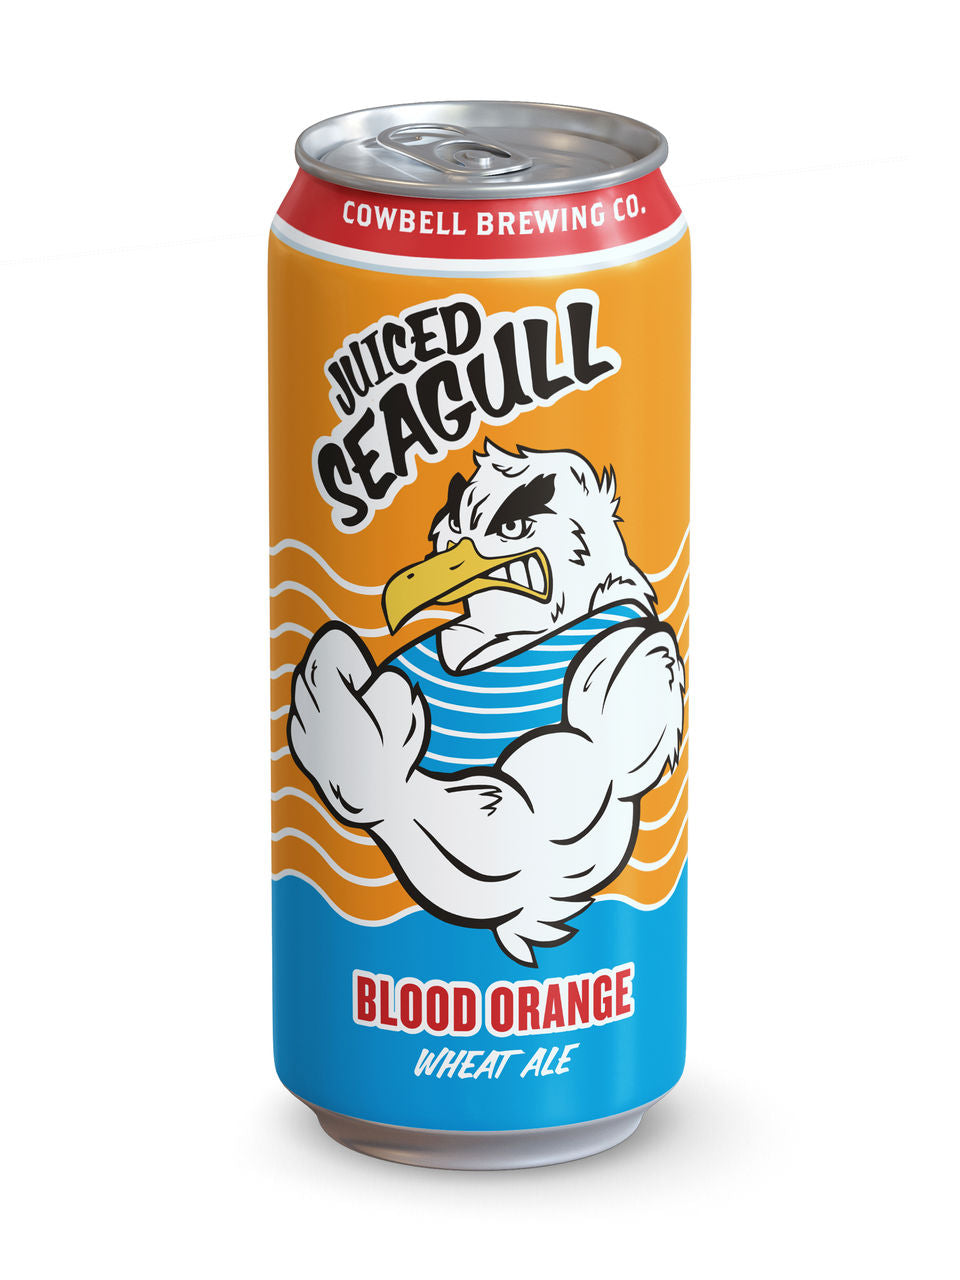 Cowbell Brewing Co. Blood Orange Summer Ale 473 ml can